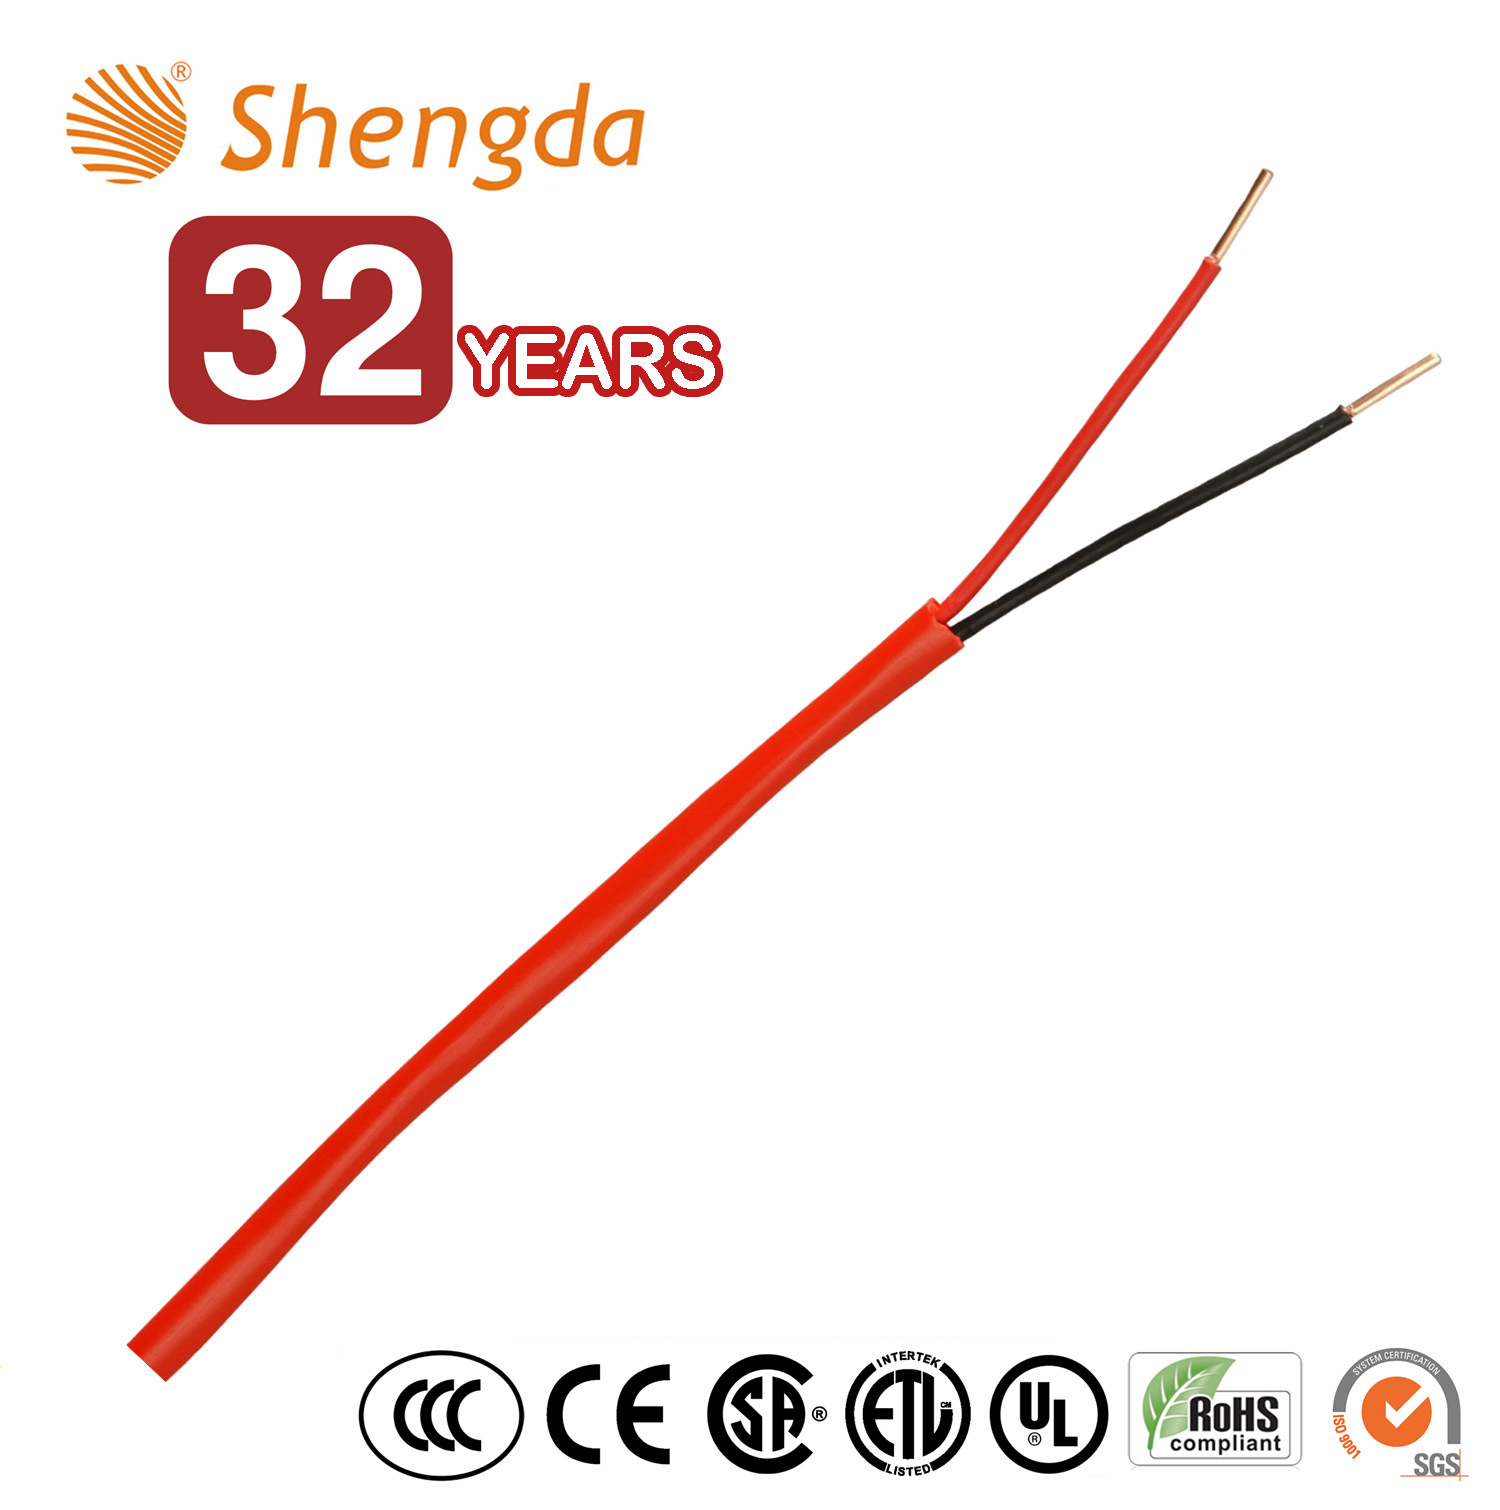 Fplp 2 Core Fire Alarm Cable Specification Apply to Burglar Alarms Fire Risistant Cable